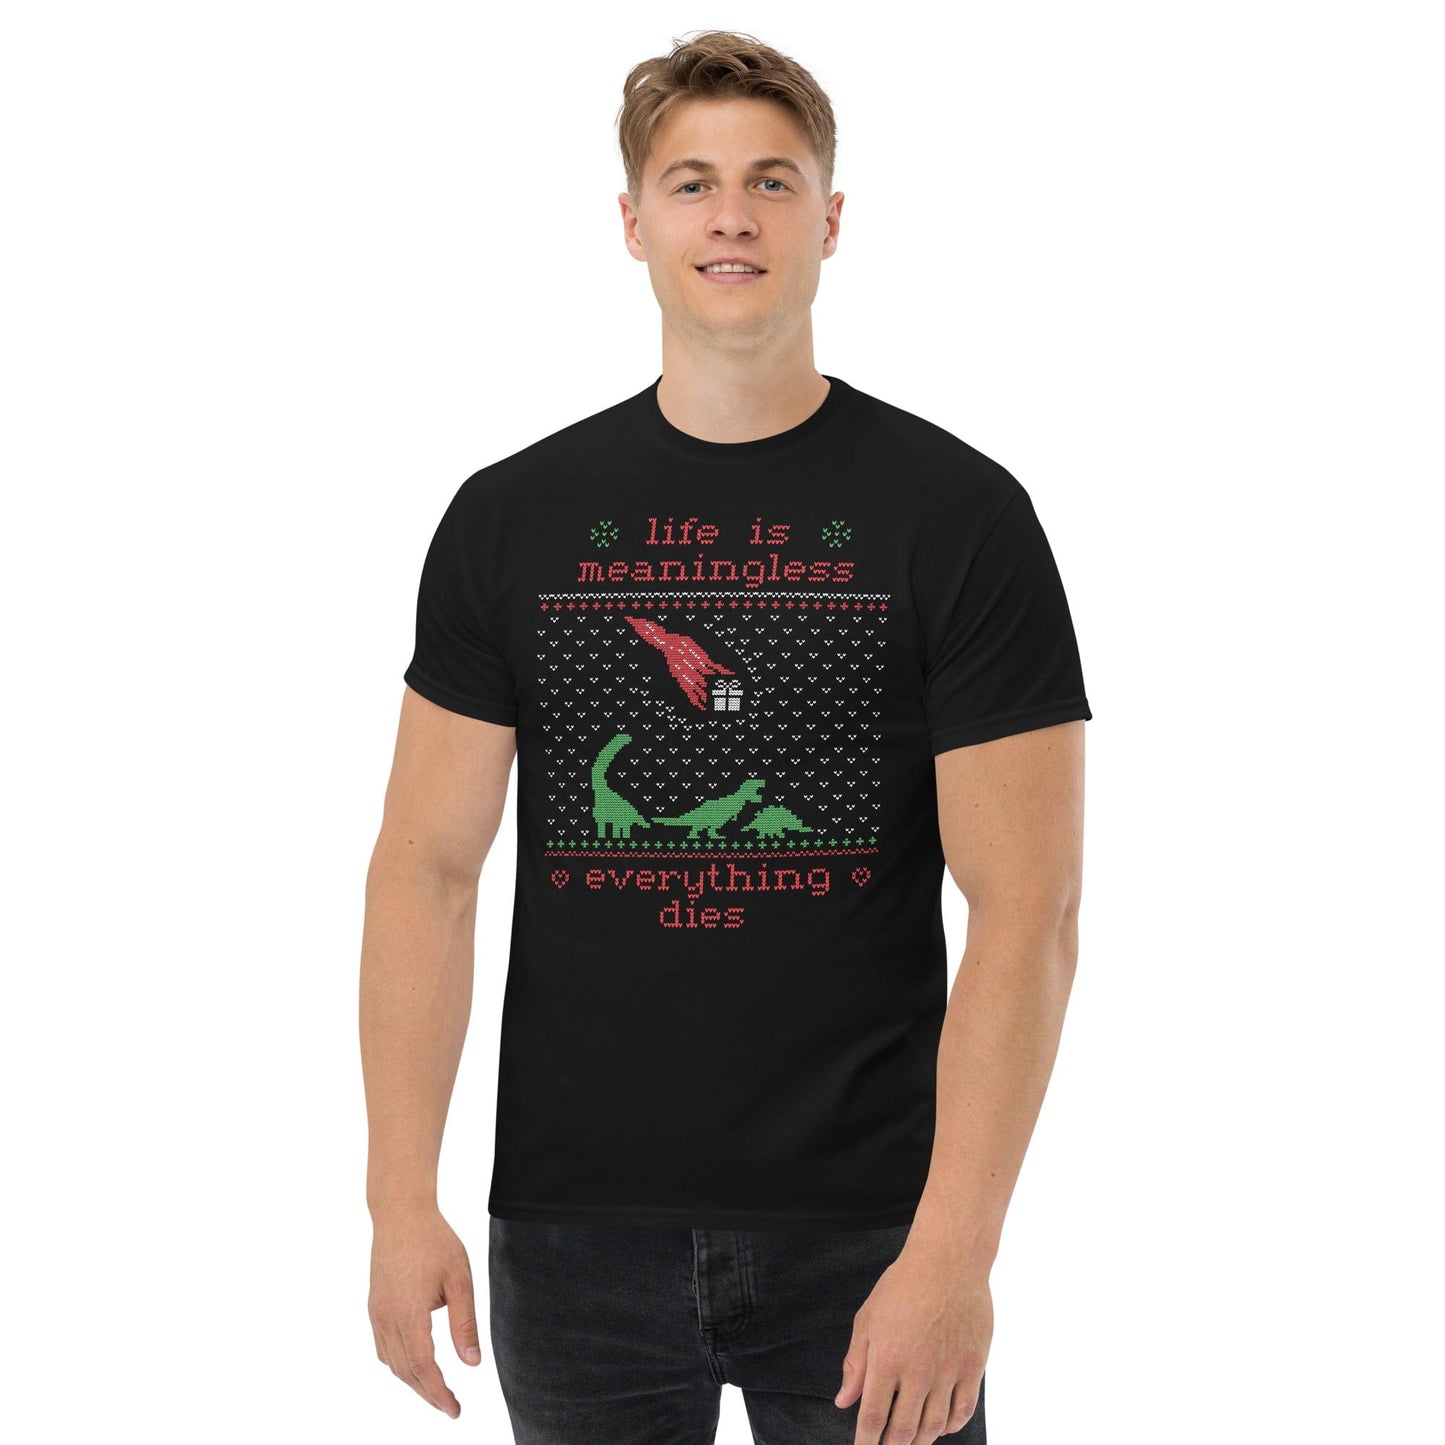 Life is meaningless - Ugly Xmas Sweater - Plus-Sized T-Shirt